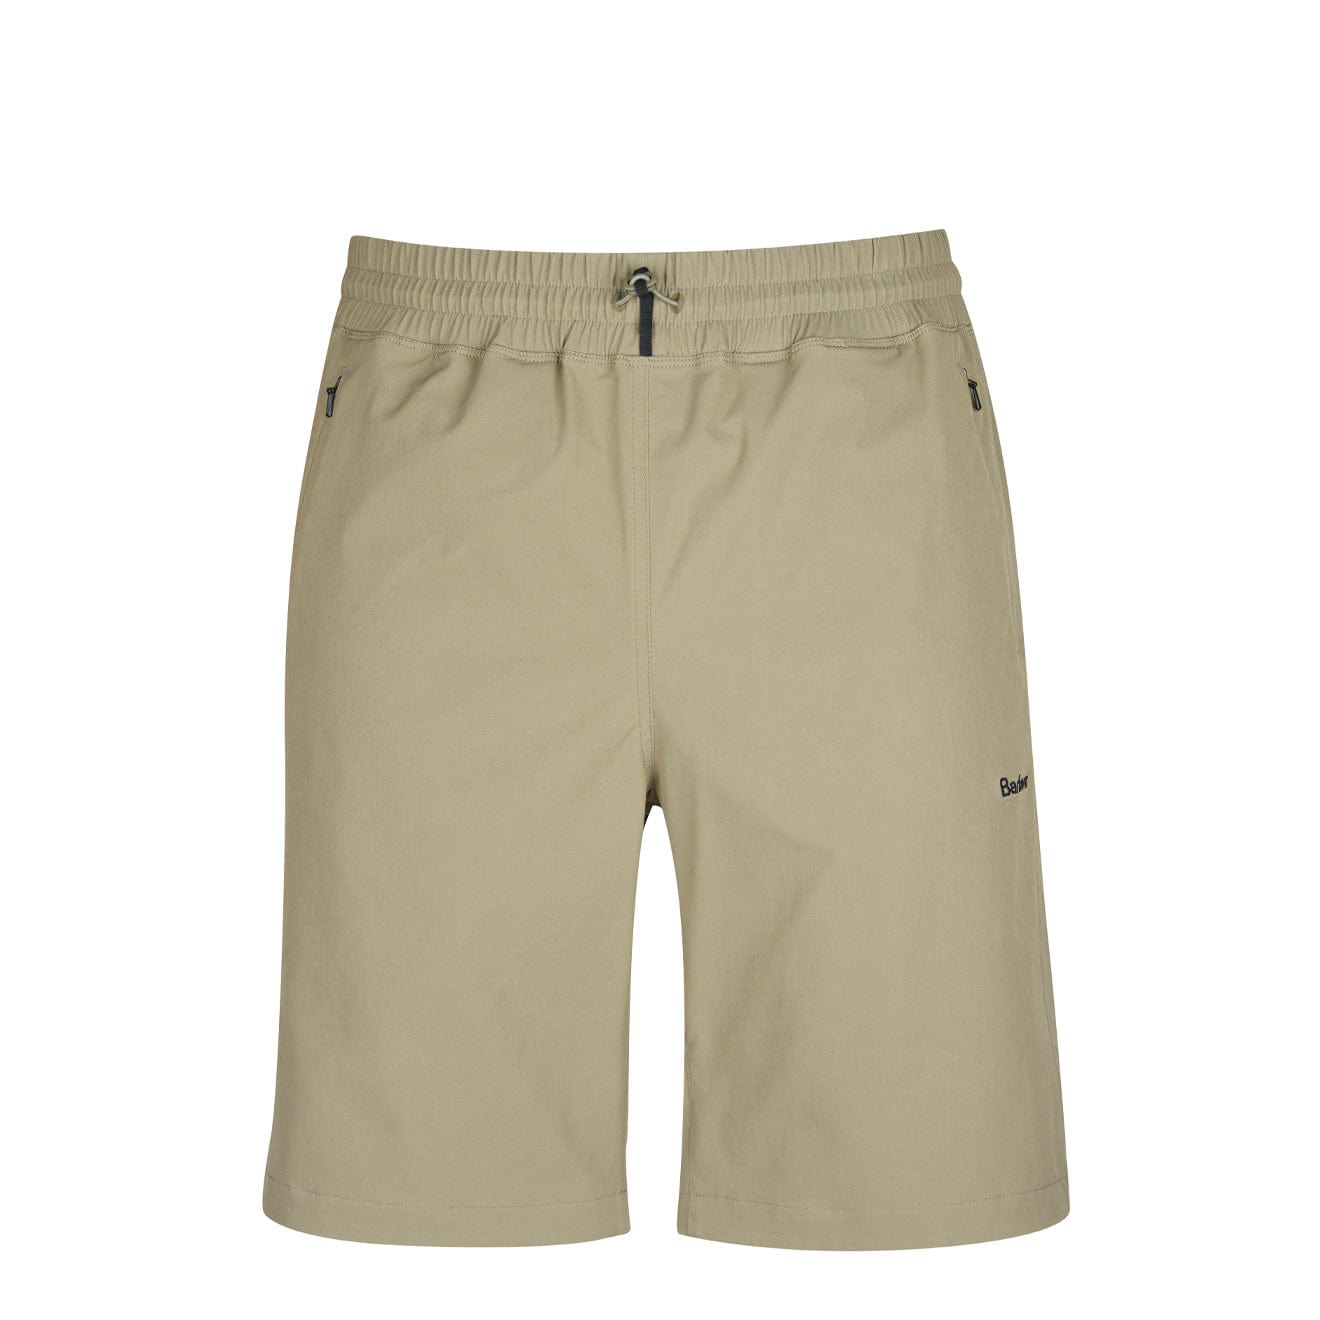 Barbour Lowland Walking Shorts Light Olive | The Sporting Lodge